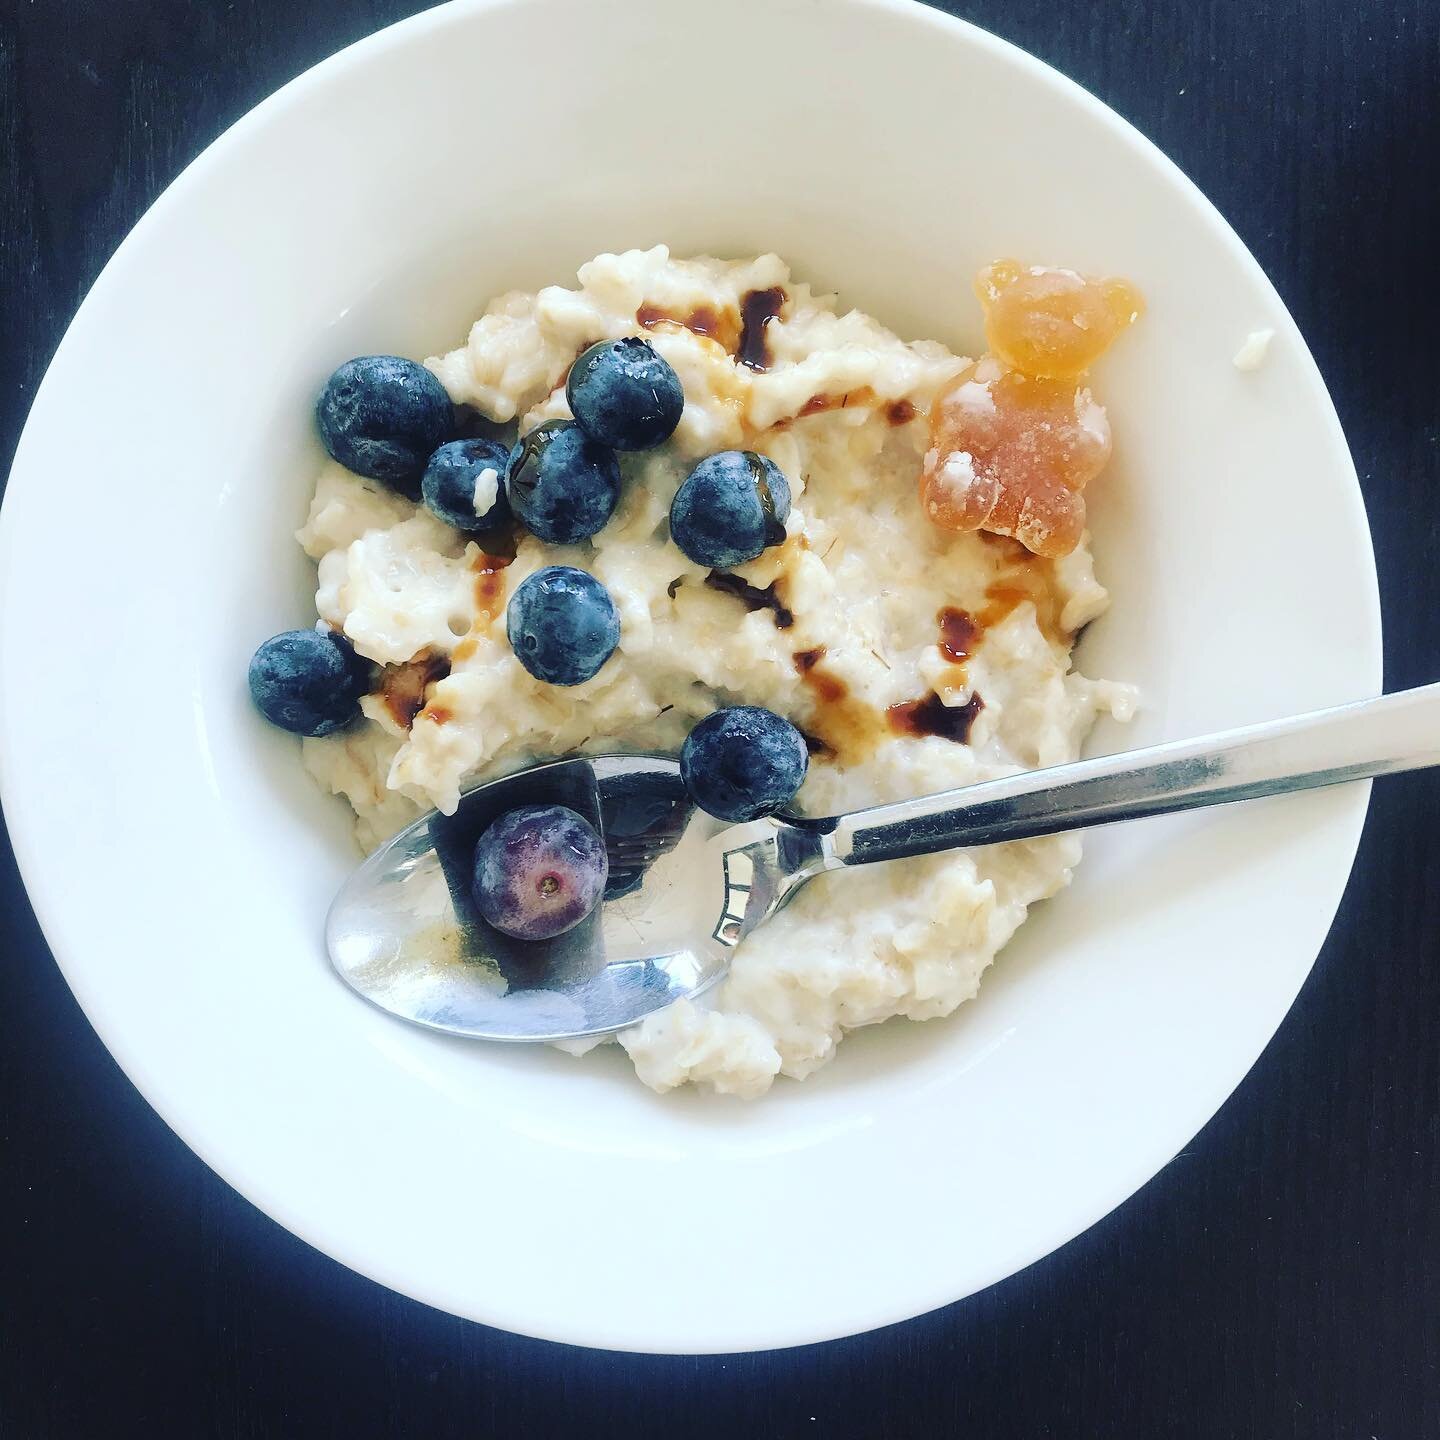 #Betterbears #gummybears oatmeal:
1 cup rolled oats
1 cup almond milk
1 cup water 
Handful of blueberries
Drizzle of date syrup
1 Just Honey Better Bear